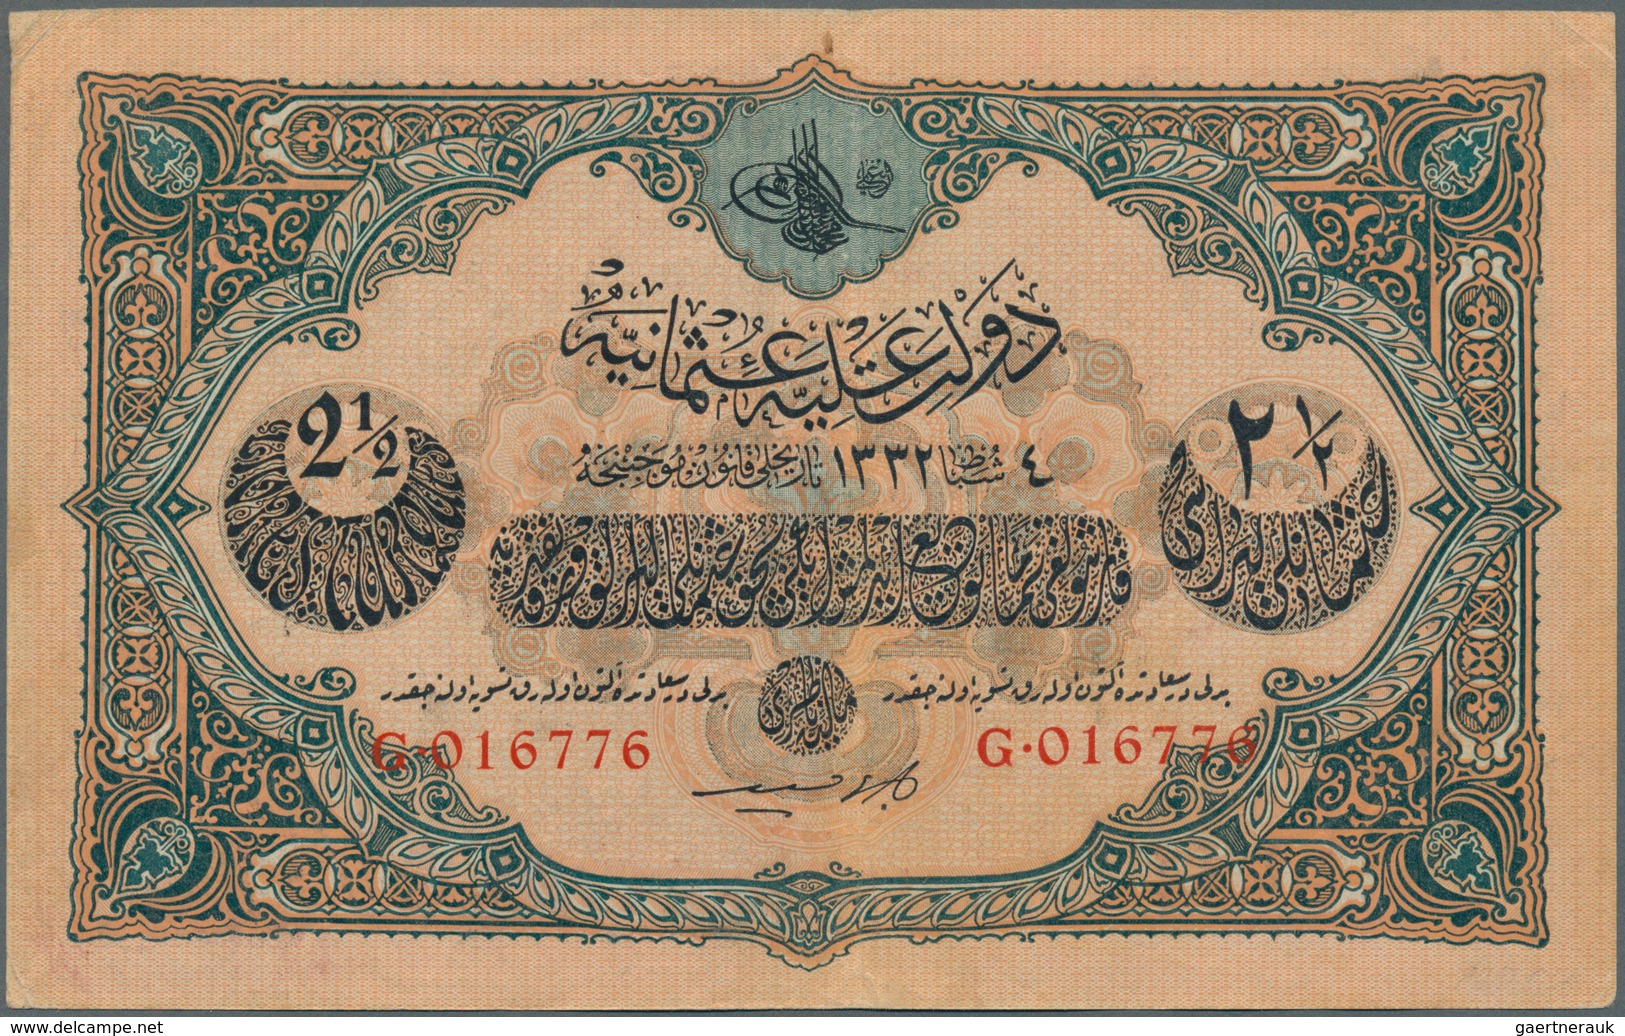 02520 Turkey / Türkei: 2 1/2 Livres ND P. 100, Used With Folds And Creases But Still Very Crisp Paper And - Turquia